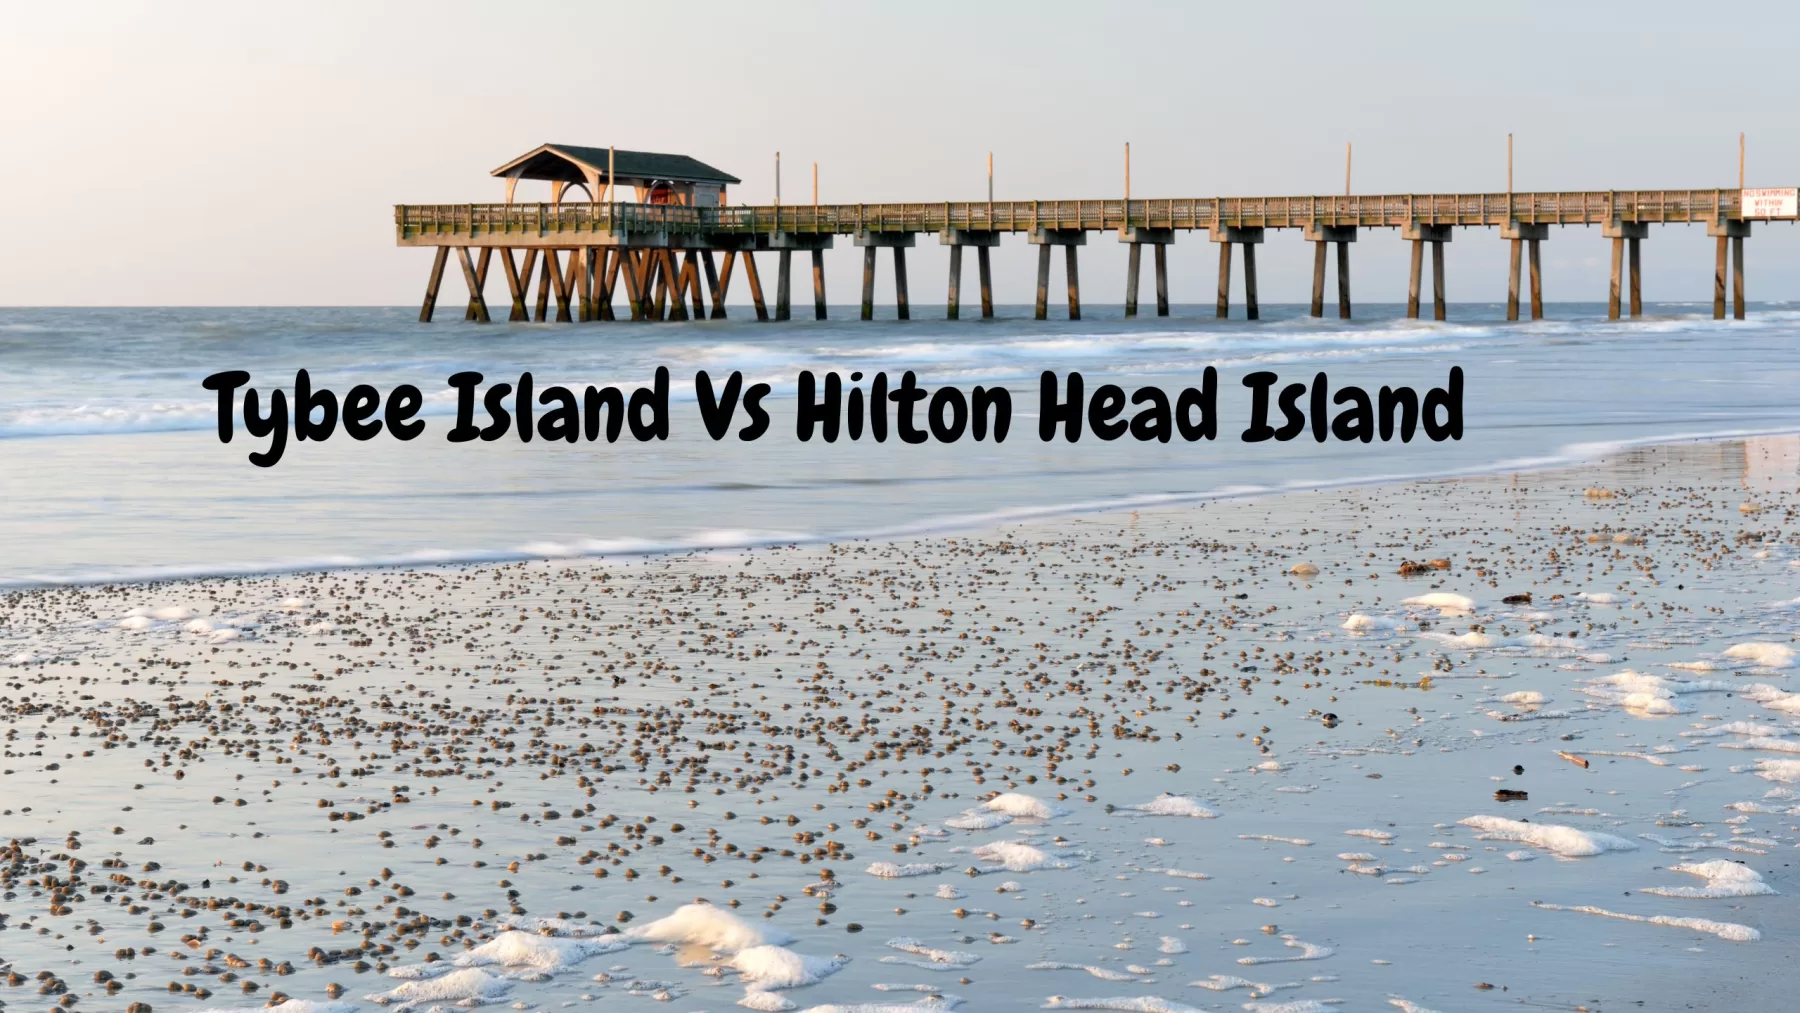 Image of The Tybee Island Pier and beach.  The beaches are covered in sea shells and the ocean water is calm. 